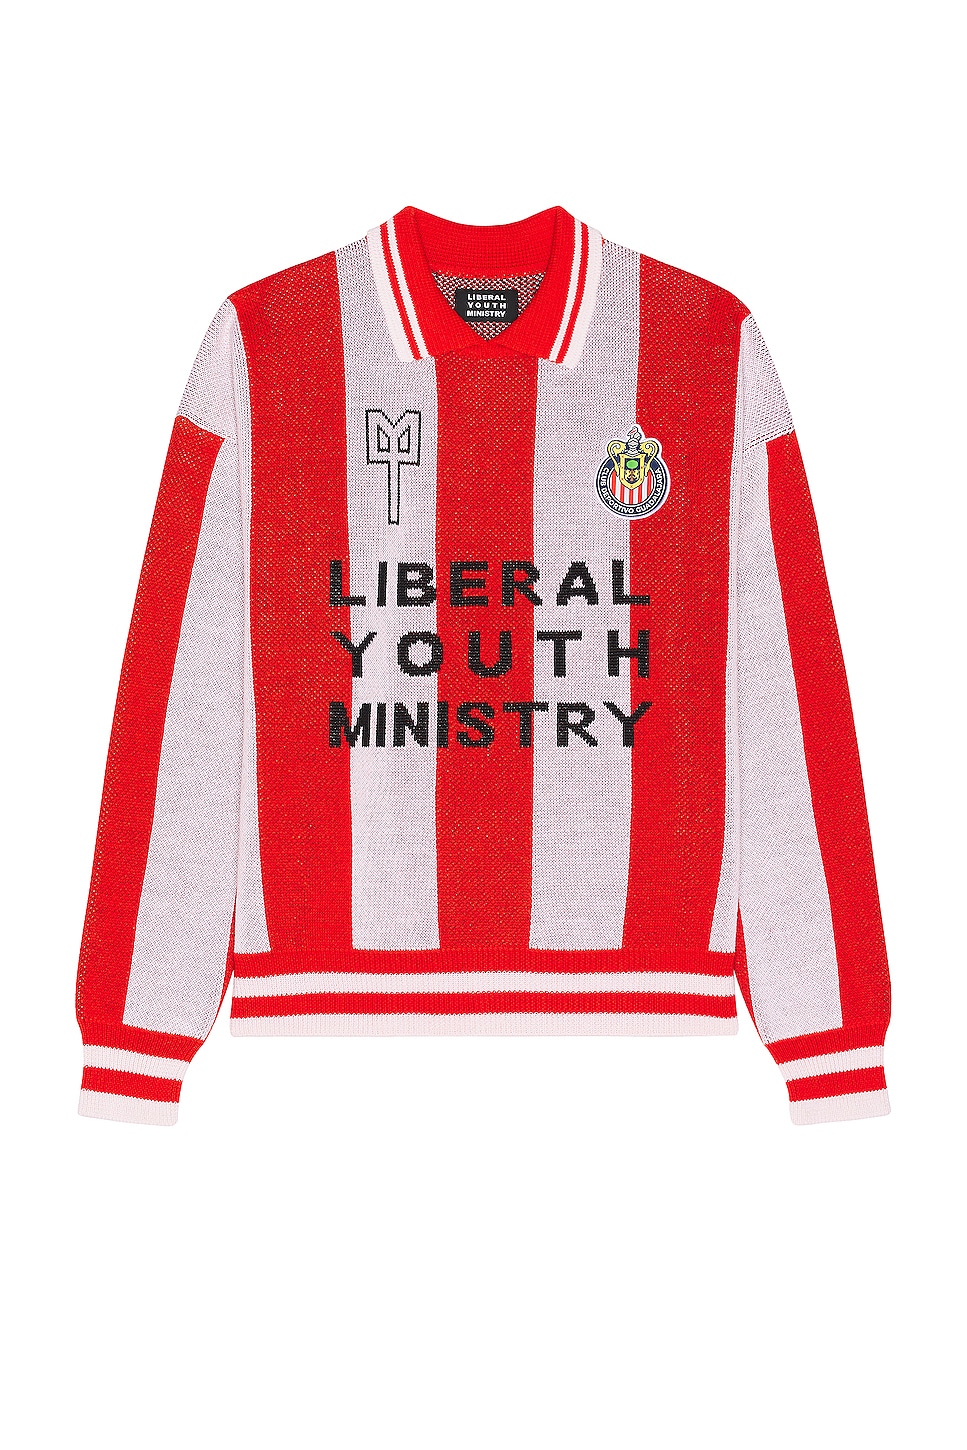 Image 1 of Liberal Youth Ministry Chivas Sweater in Stripes